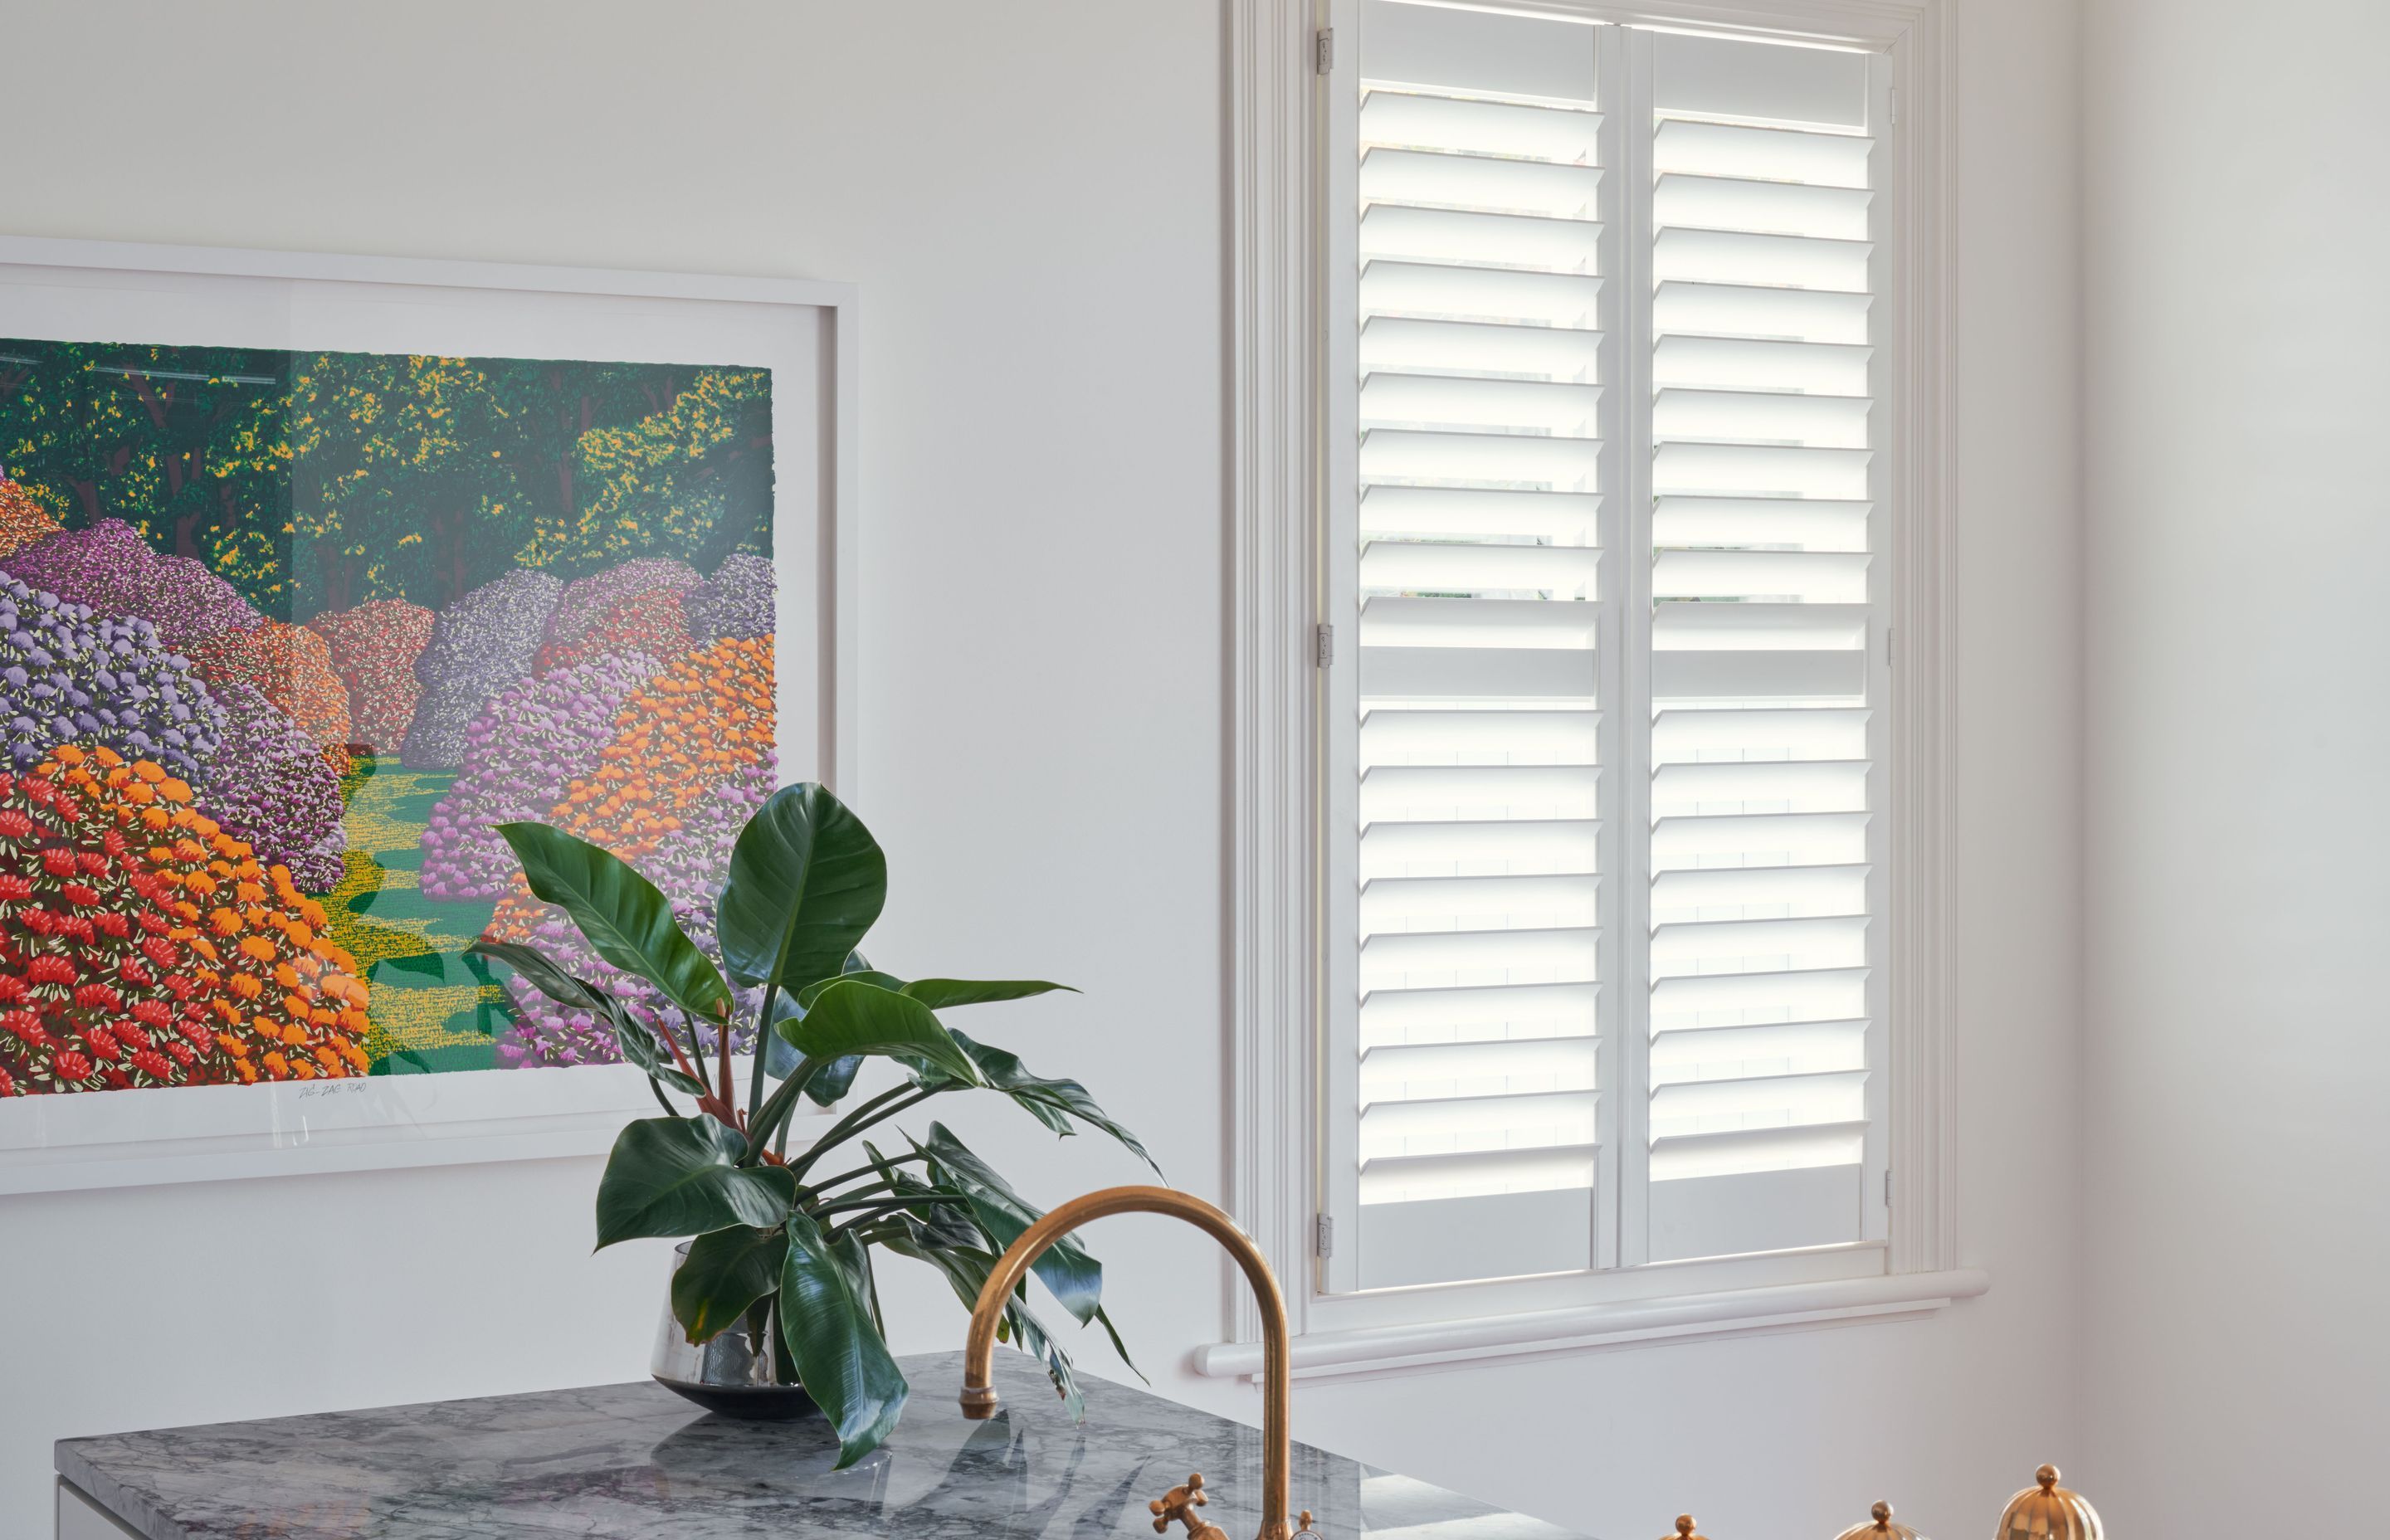 Shutters offer a minimalist aesthetic while adding a textural quality.